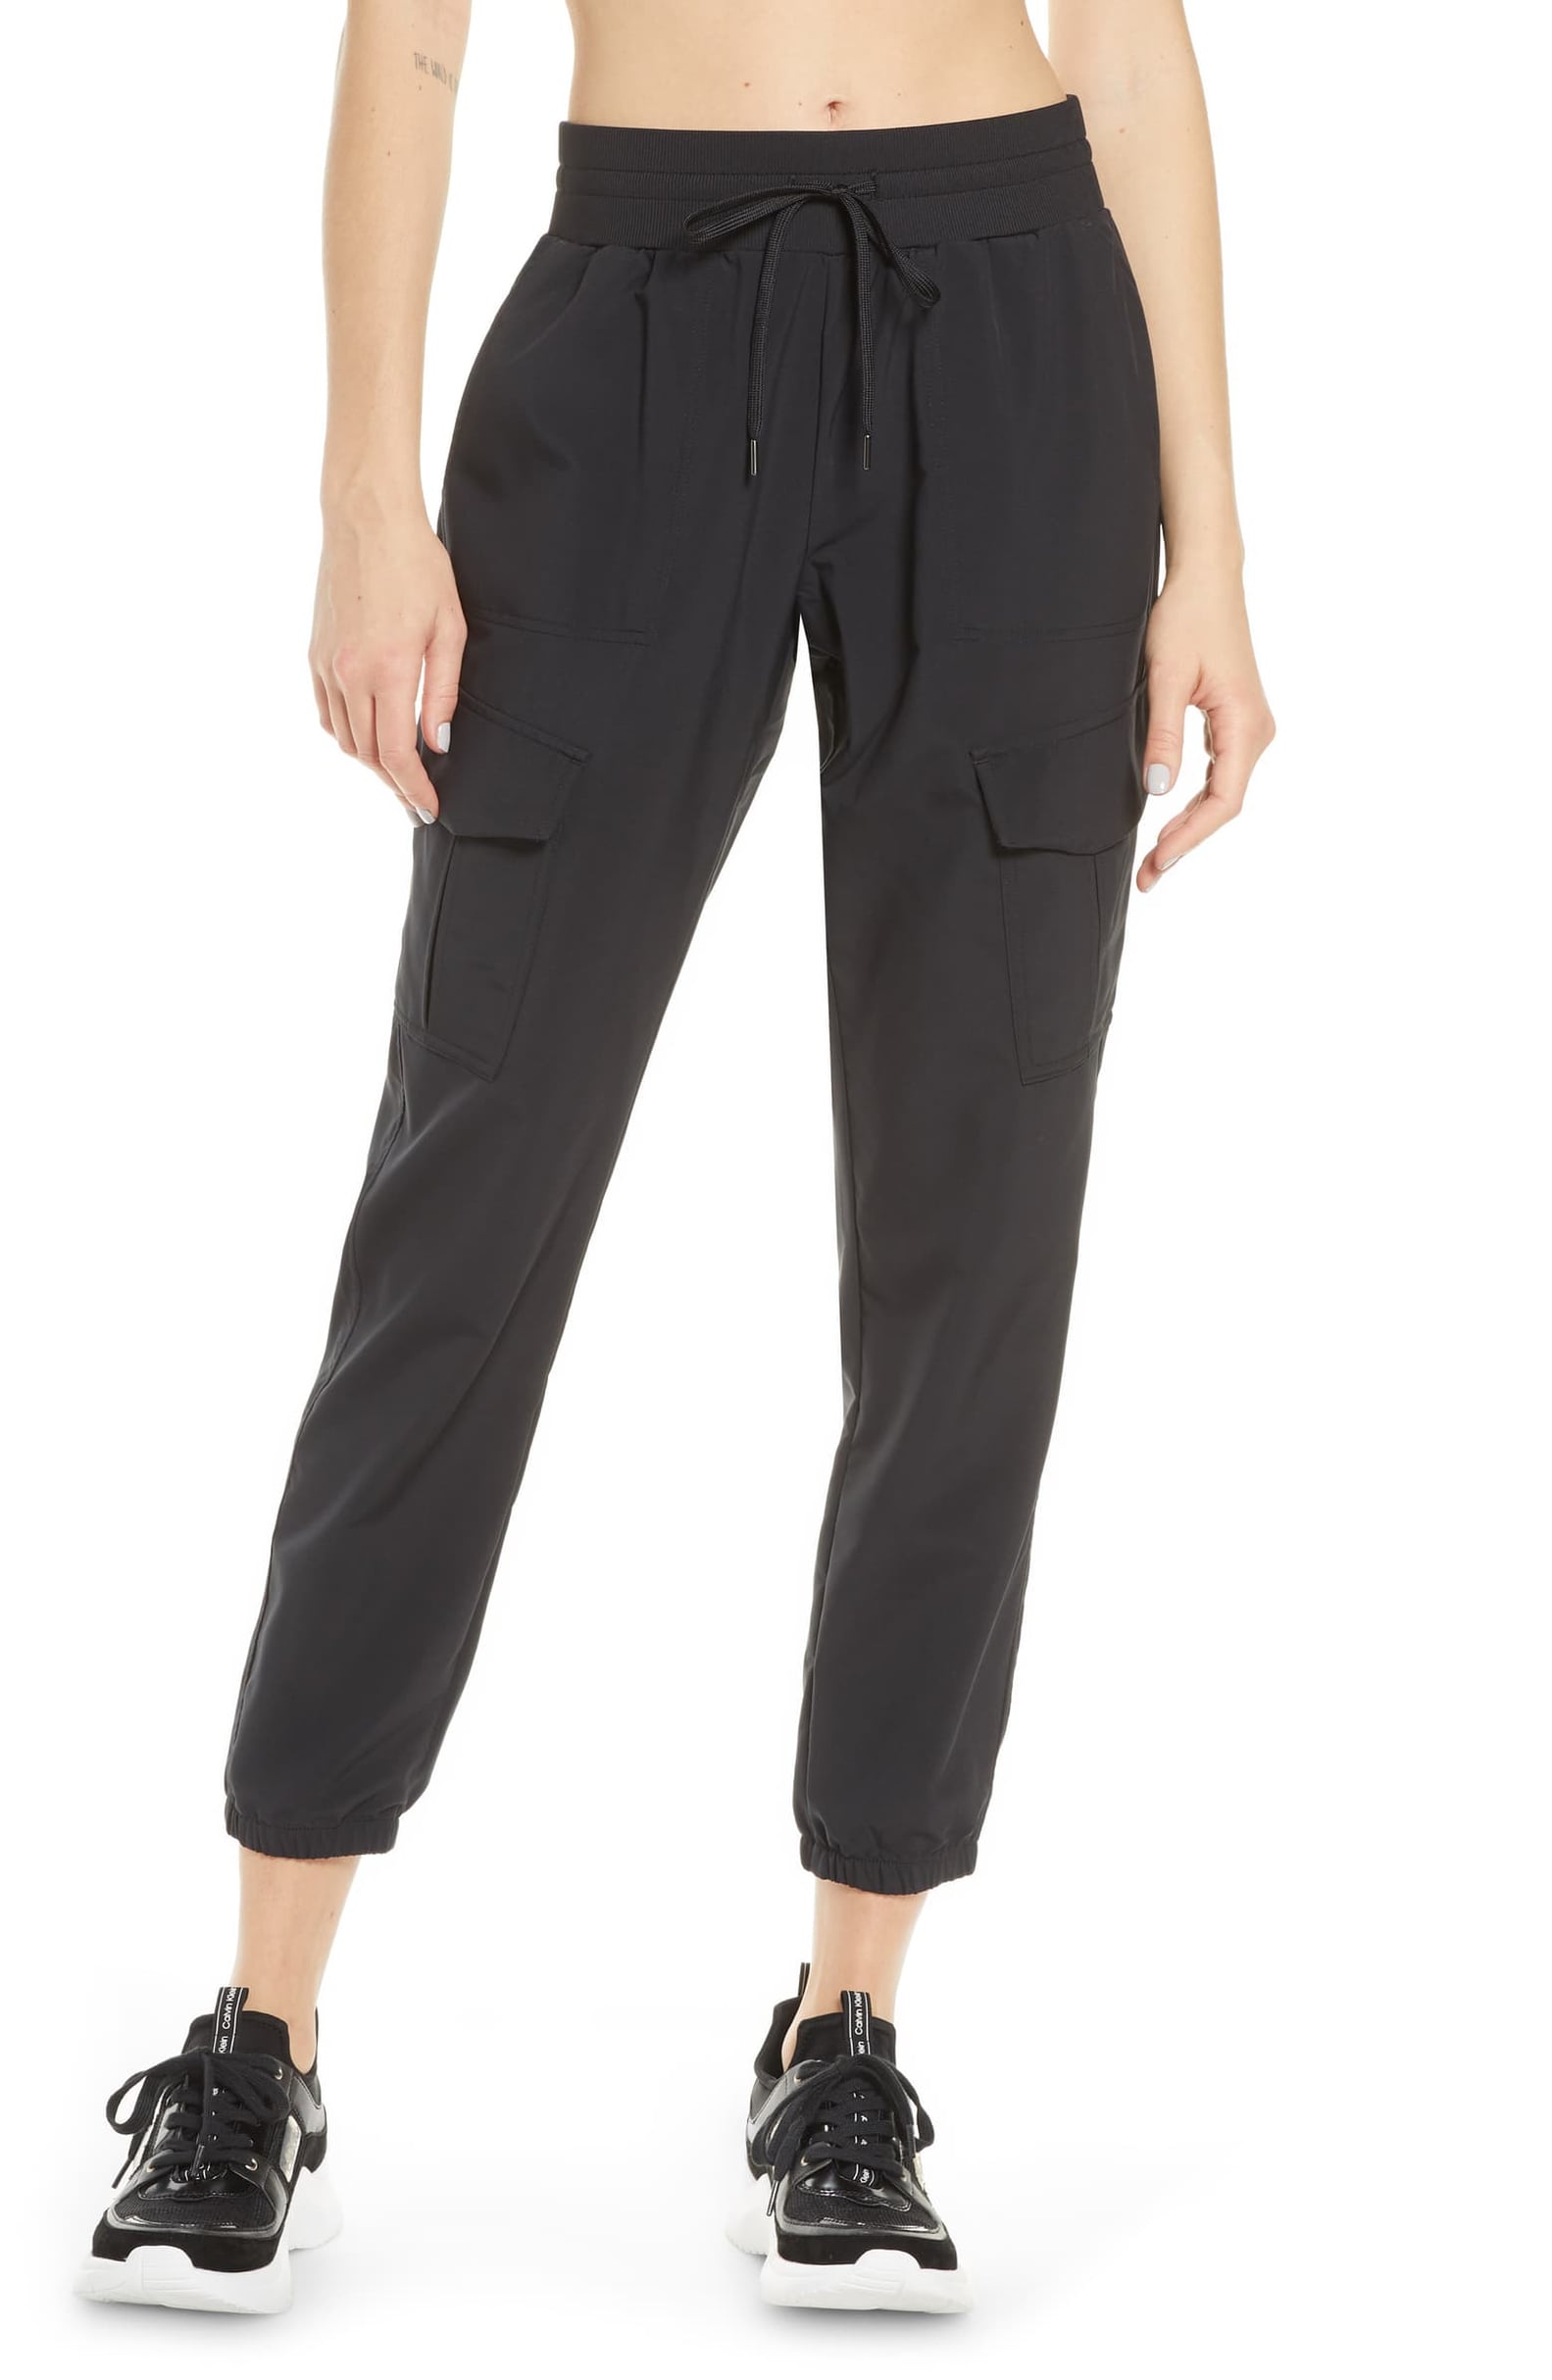 Most Comfortable Stretchy Pants For Women | POPSUGAR Fashion